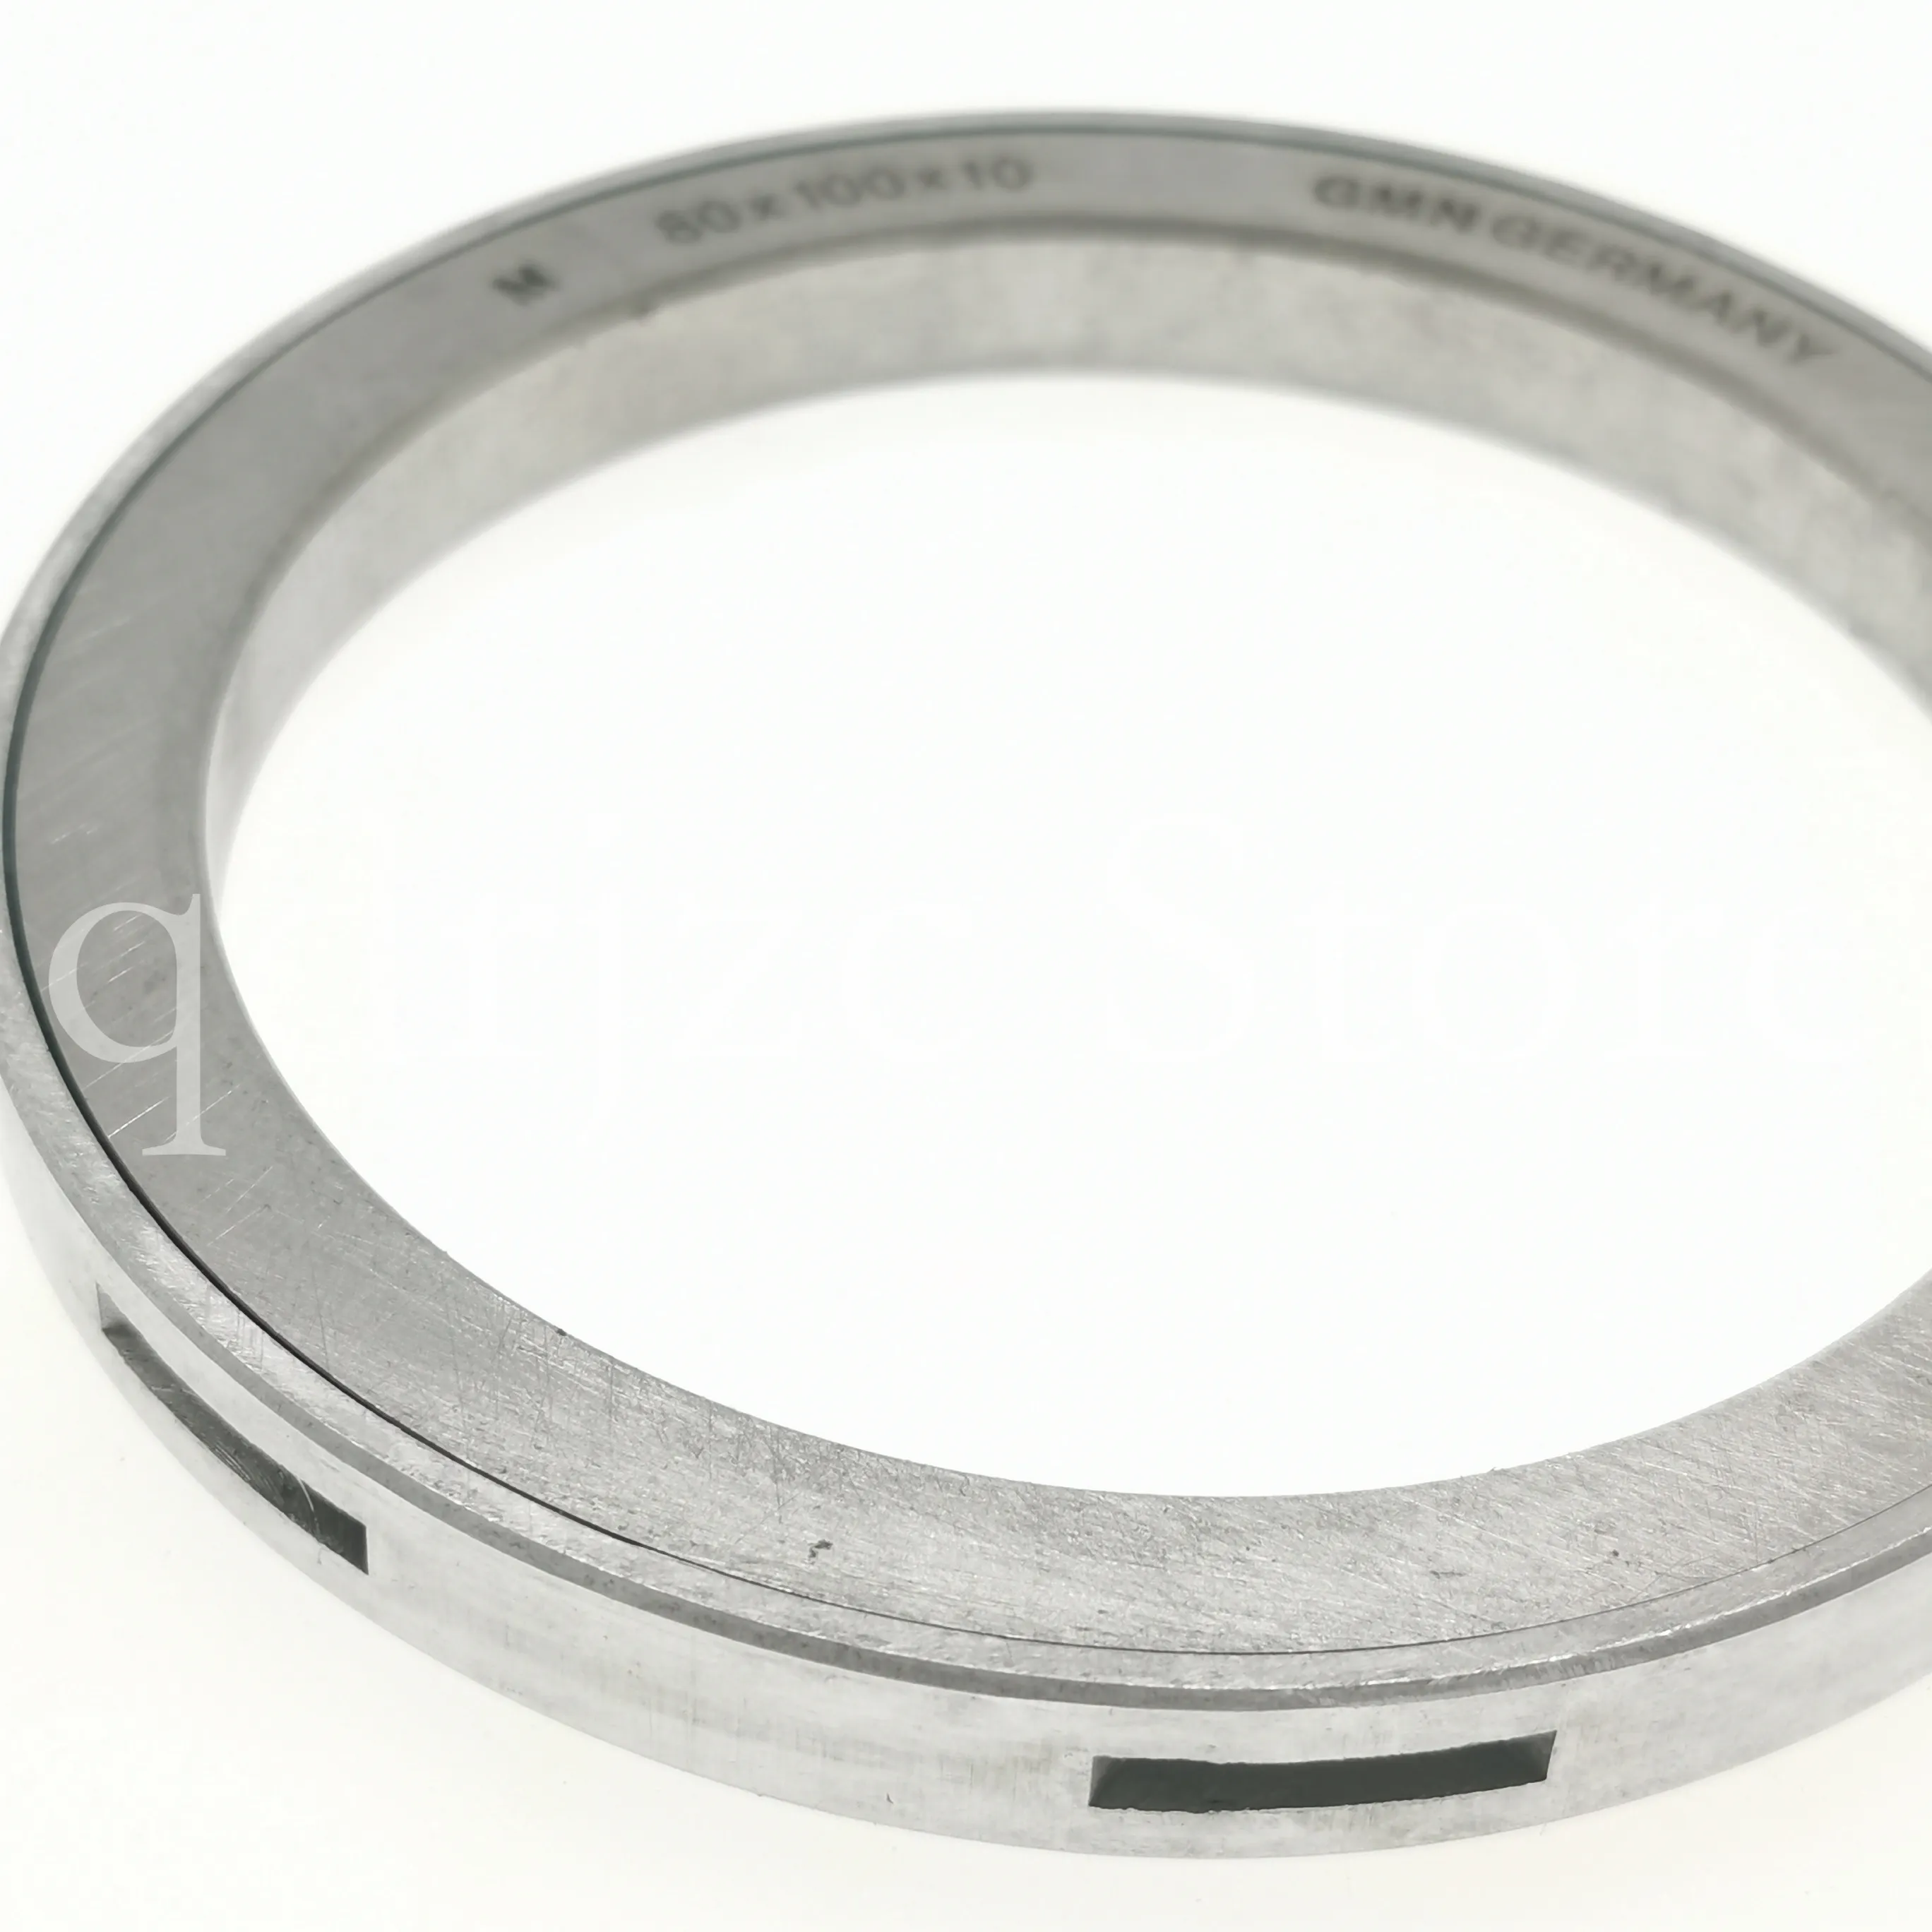 Flange Ring Type Joint Gasket Rtj - China Joint Ring, Oil Pipe Seal |  Made-in-China.com